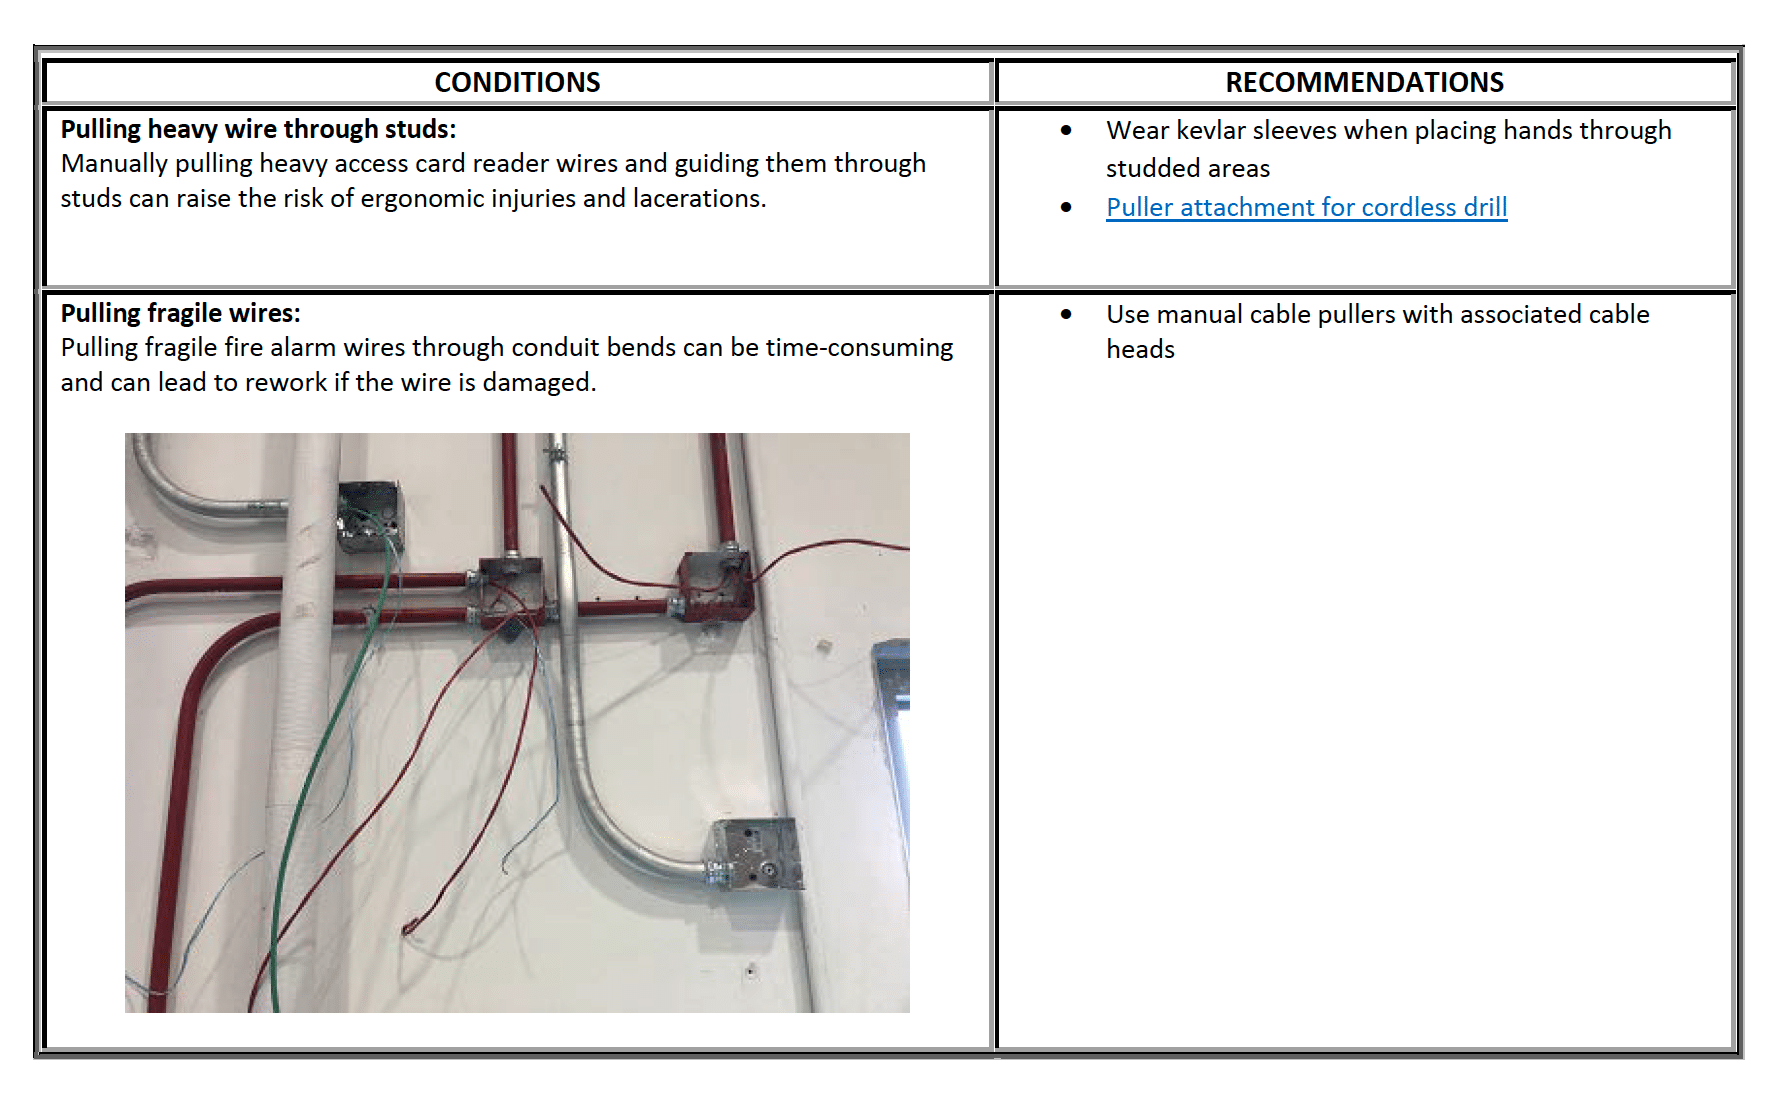 Image from one the Electrical Task Analysis documents